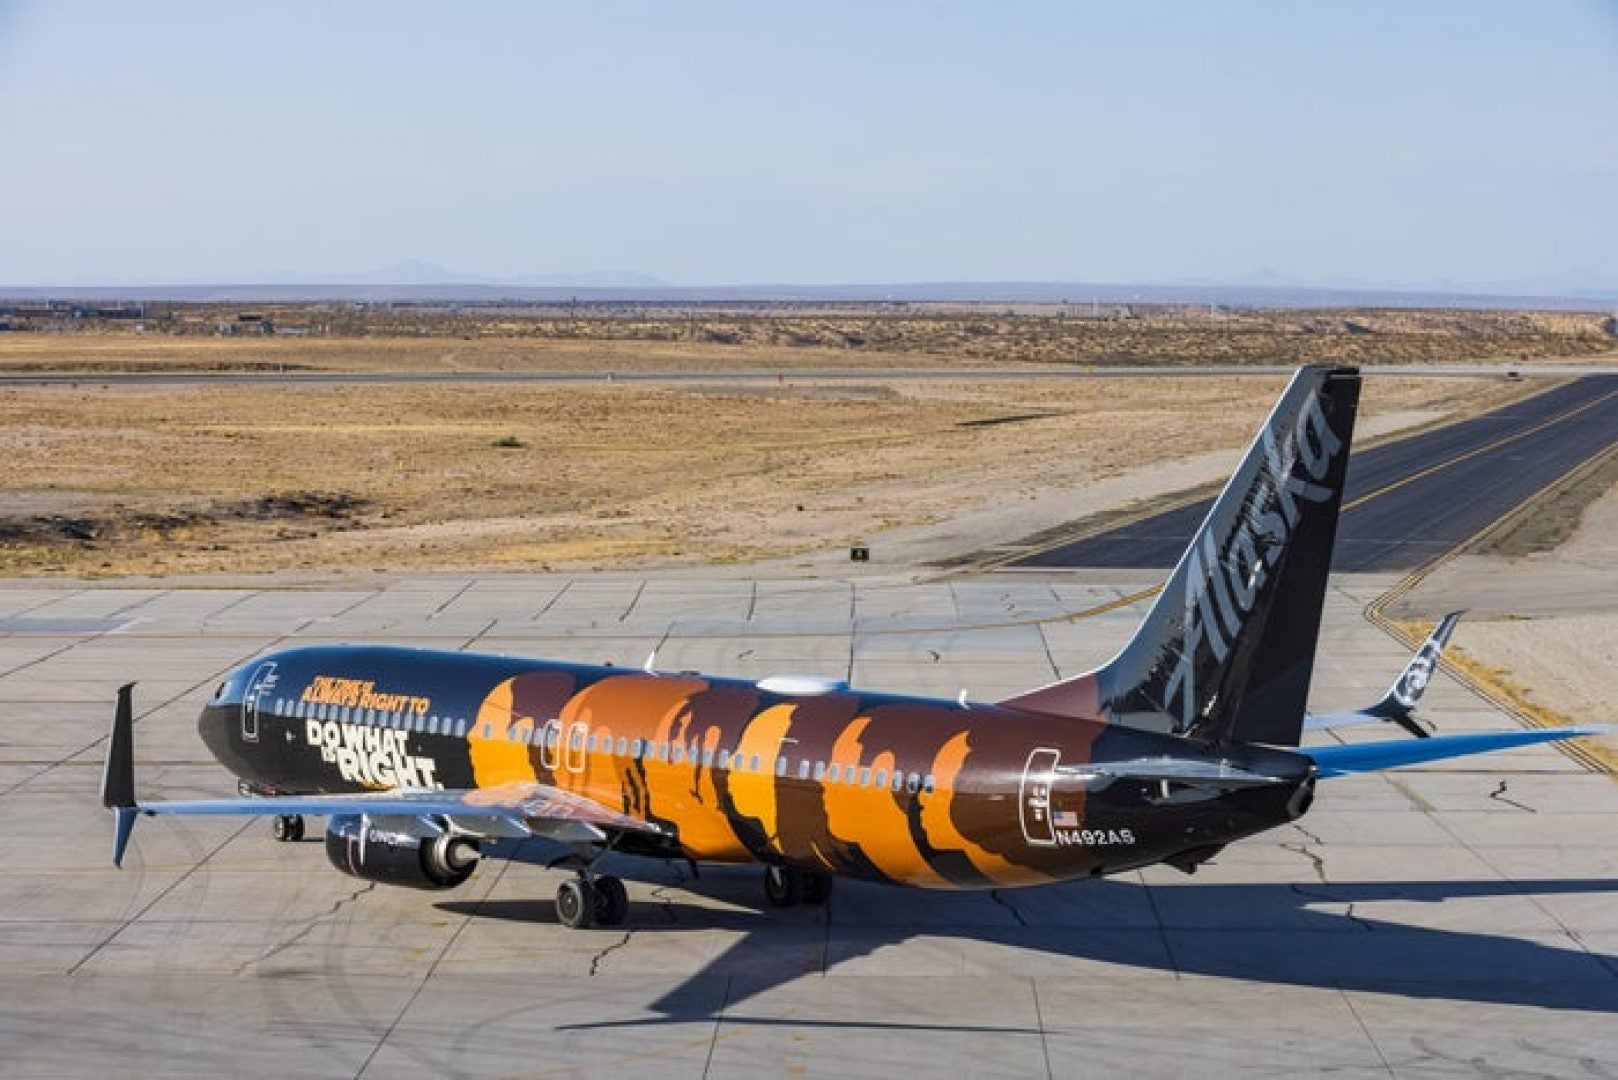 Alaska Airlines Unveils “Commitment” Aircraft In Support Of United Negro College Fund